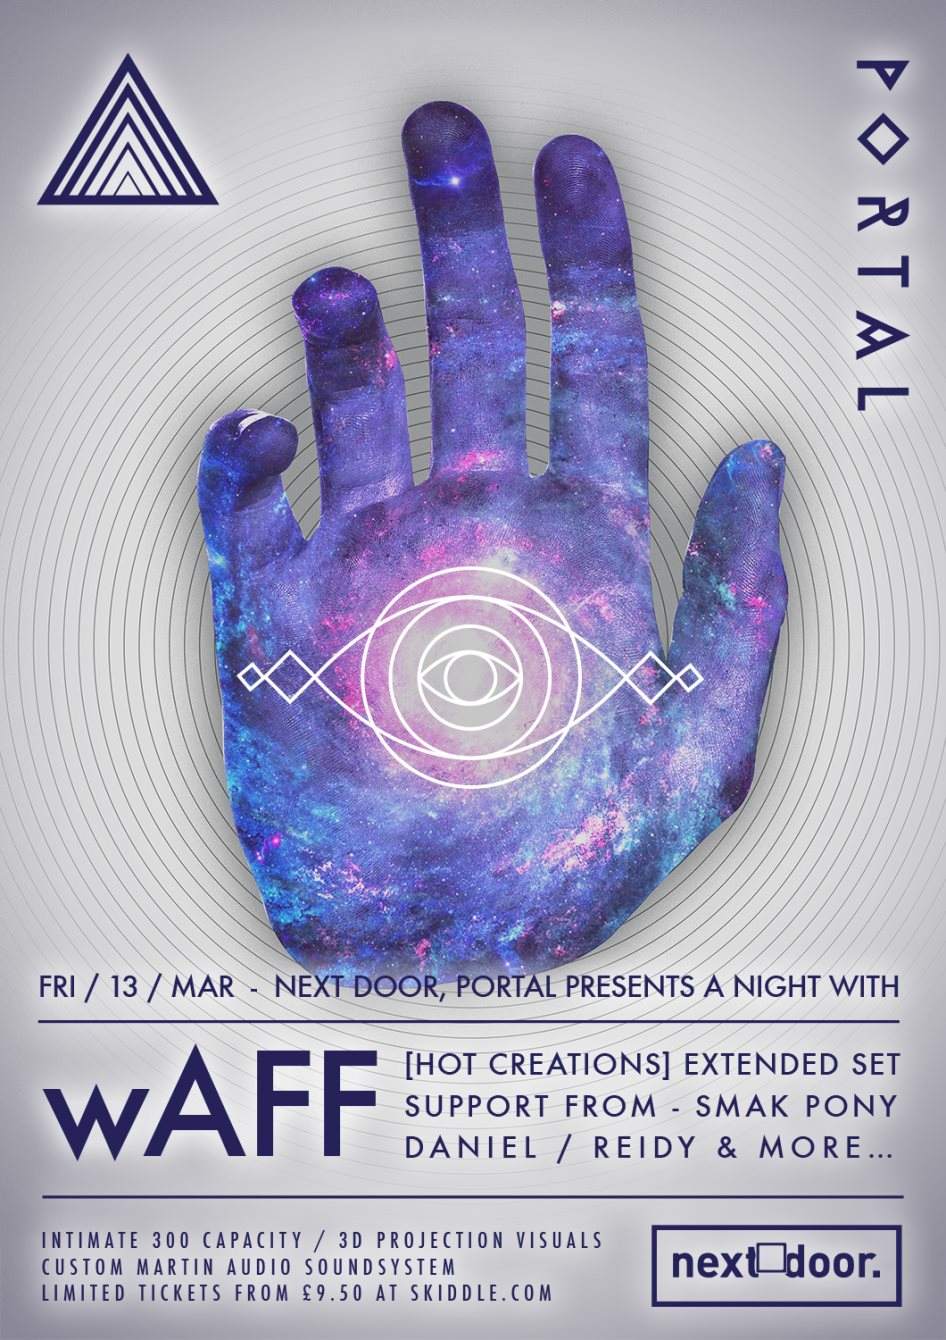 The Portal presents A Night with wAFF - Página frontal